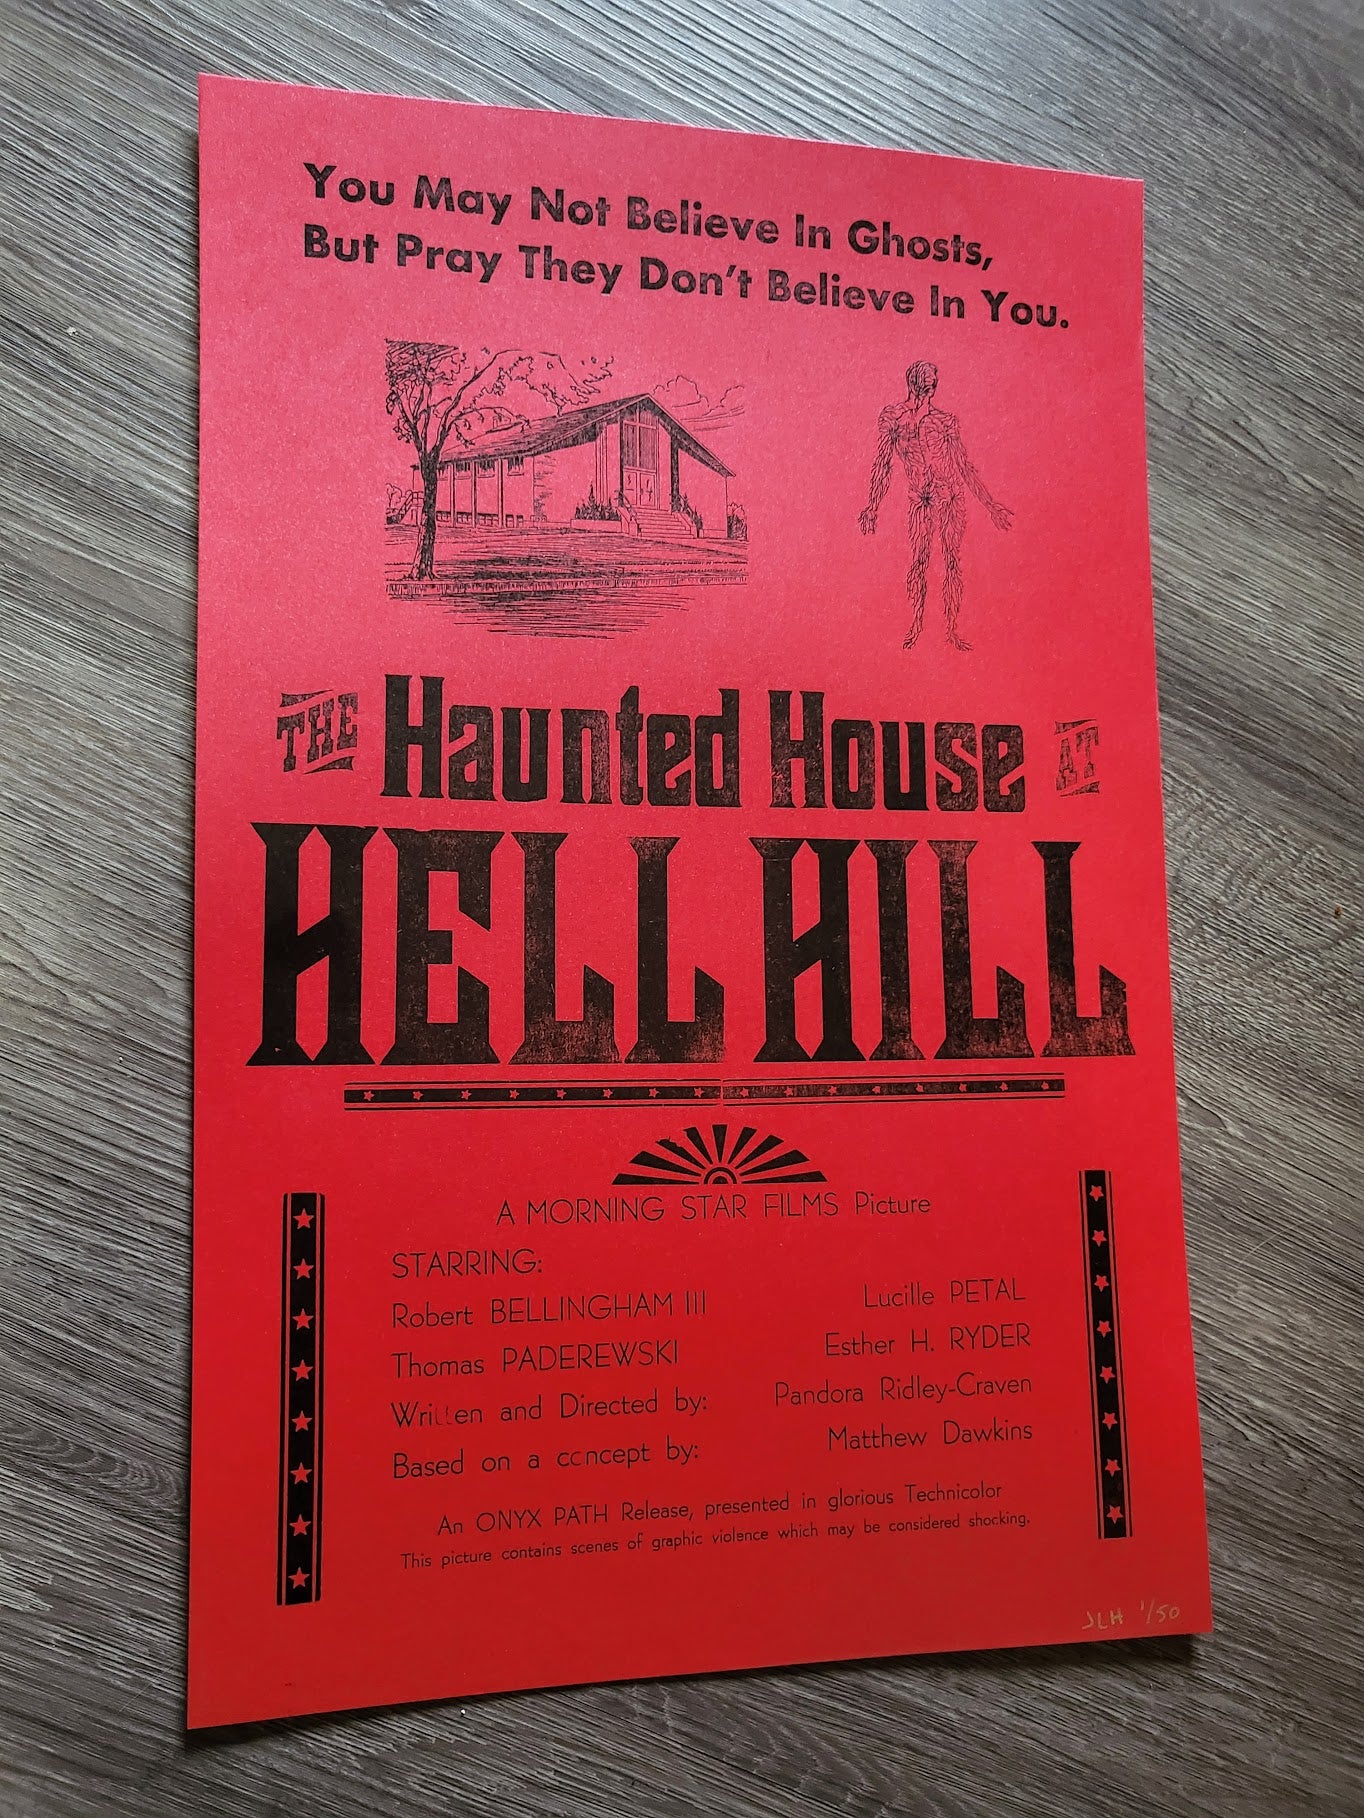 "The Haunted House at Hell Hell" Letterpress Movie Poster